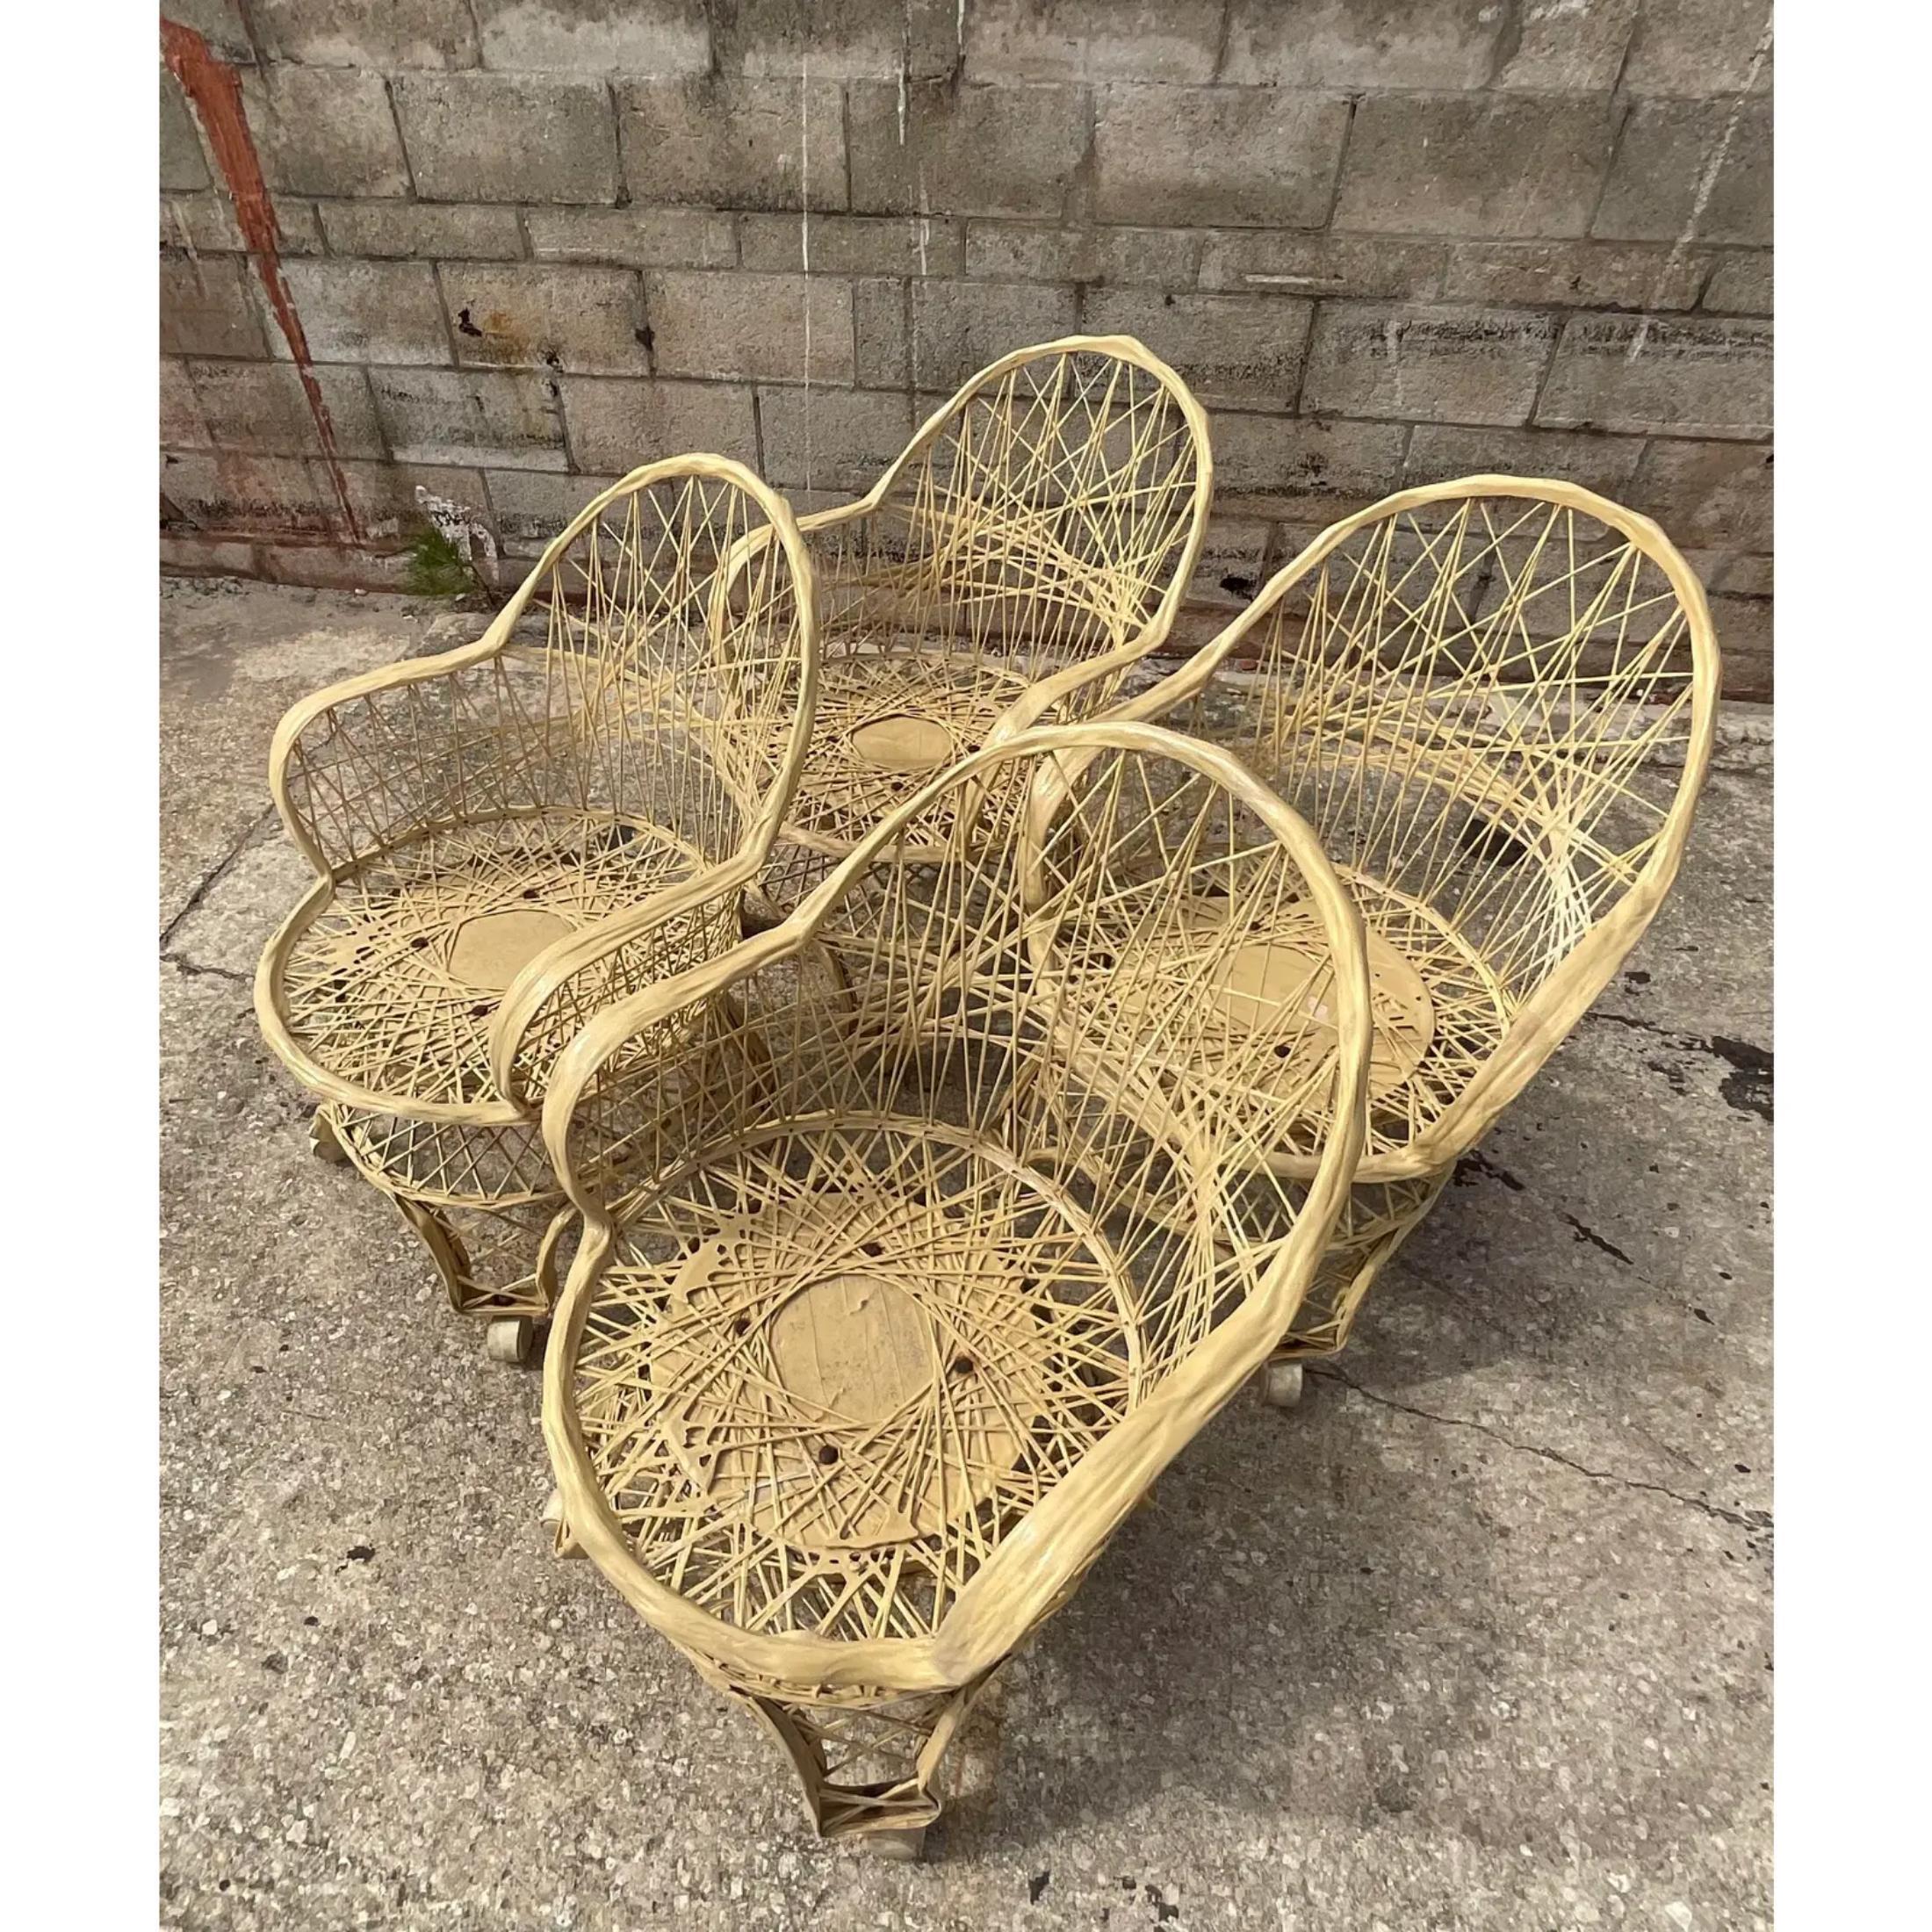 A fab set of four Russell Woodard dining chairs. Done in the iconic spun fiberglass web design. The chairs are the coveted Eiffel Tower base on casters. Acquired from a Palm Beach estate